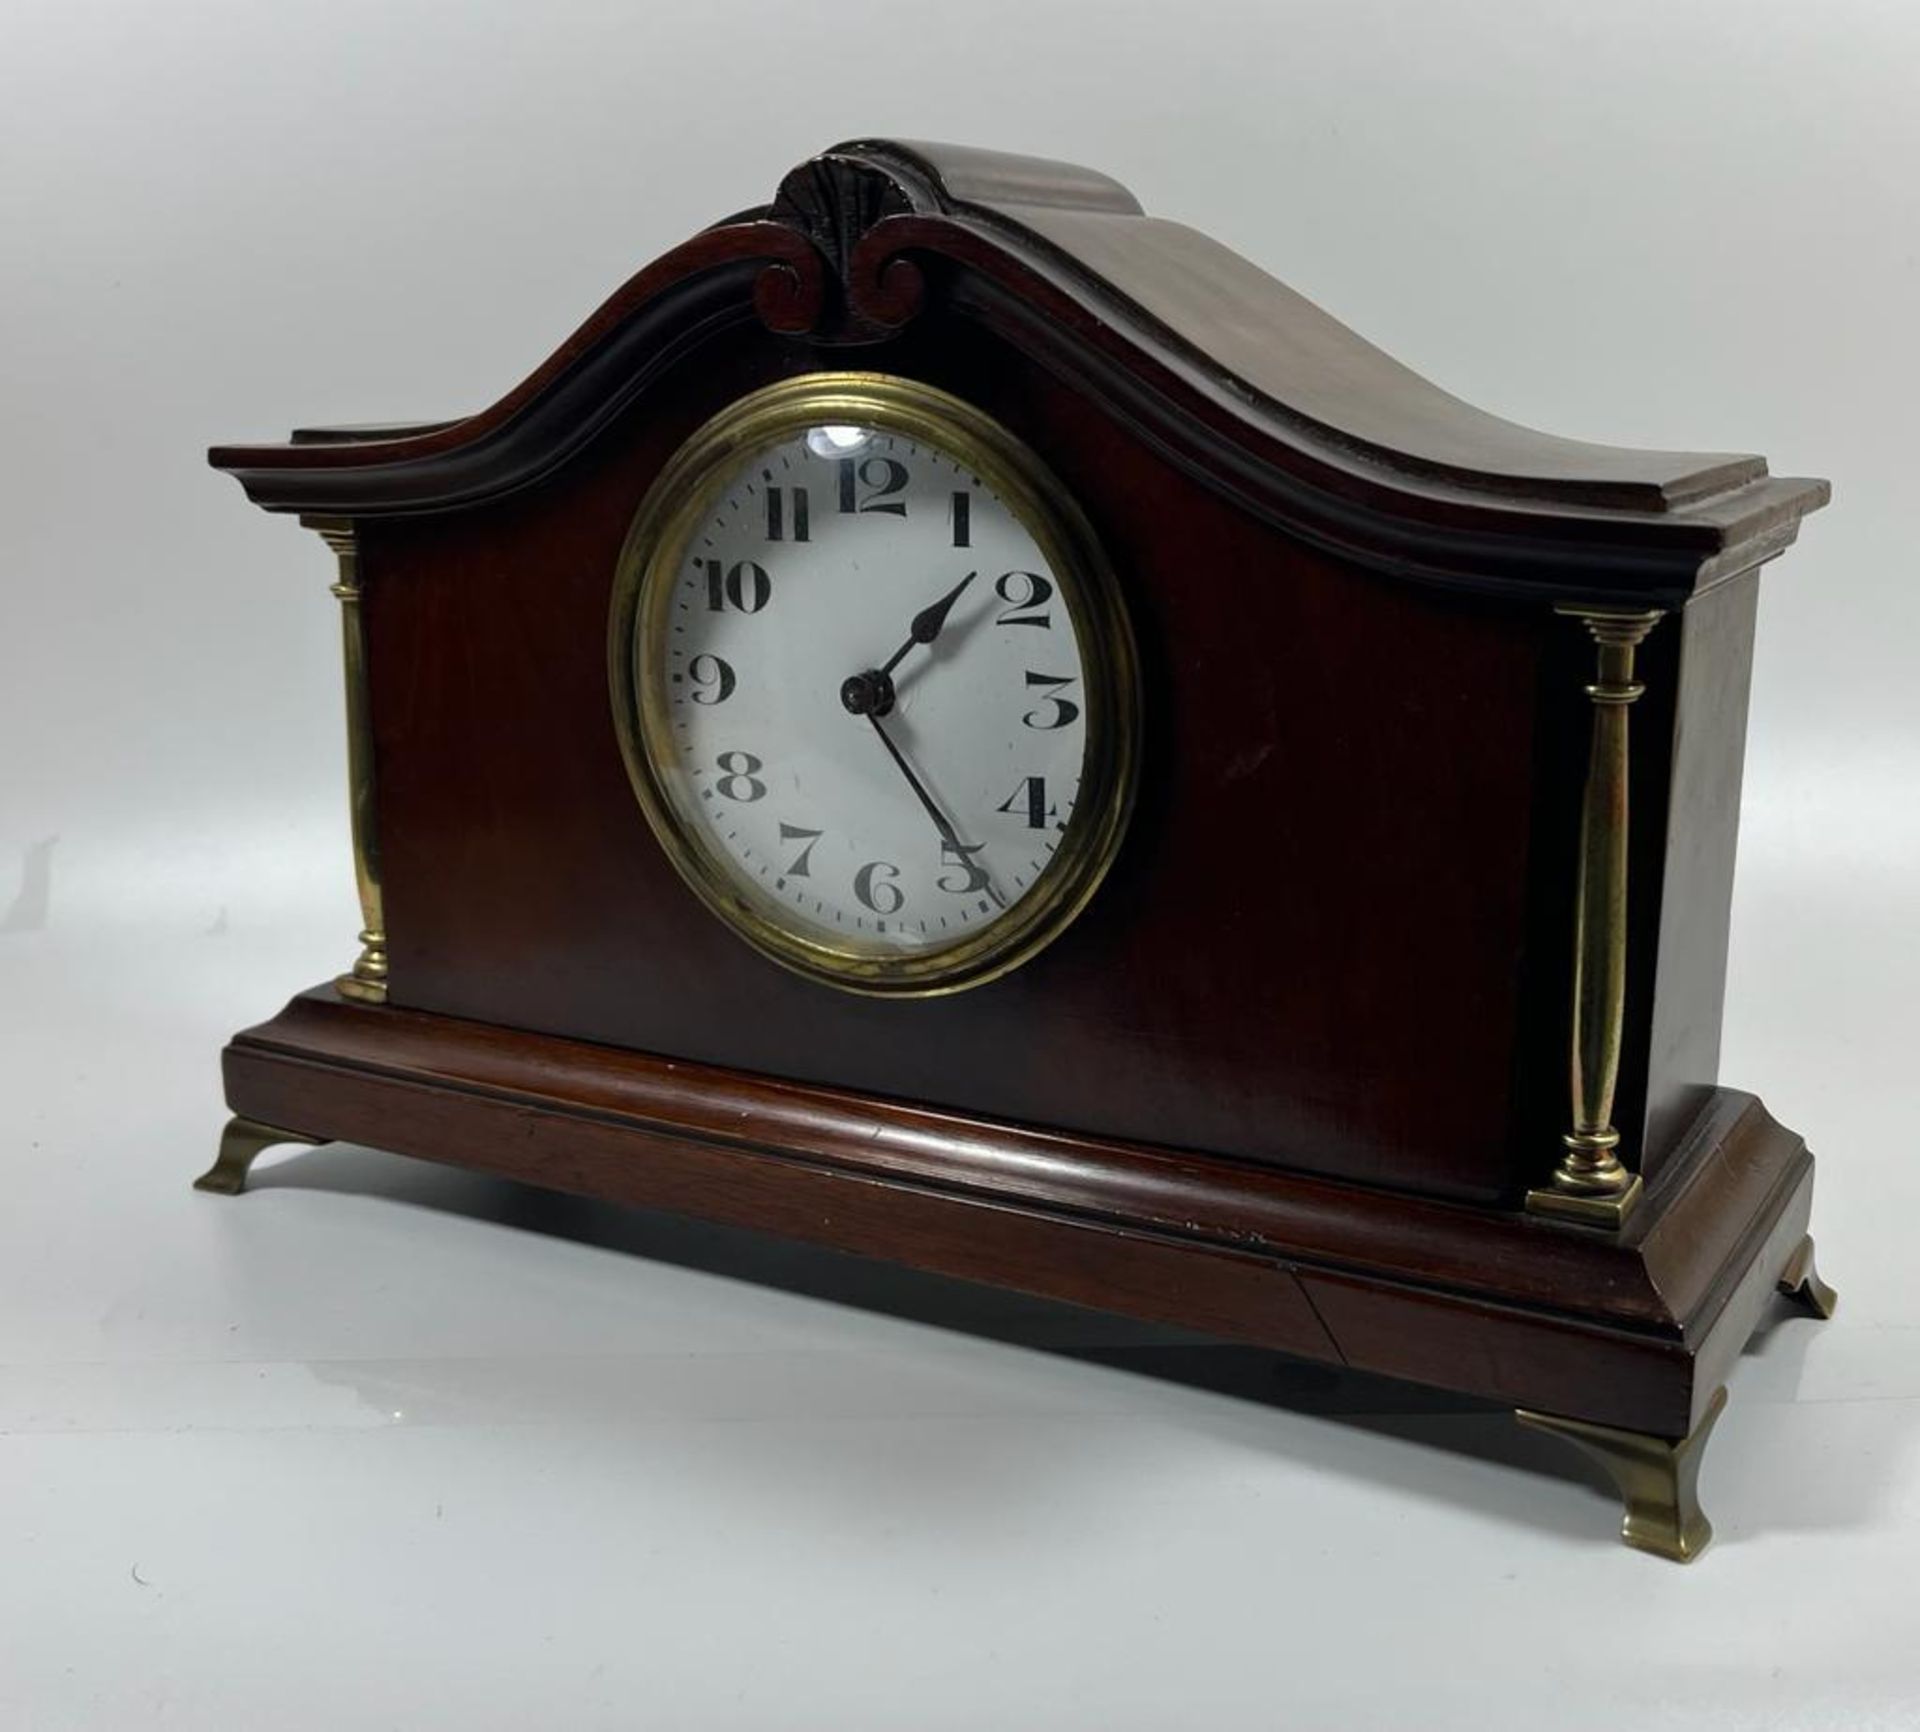 A MAHOGANY MANTLE CLOCK WITH BRASS COLUMNS AND FEET WITH JAPE FRERES MOVEMENT, 19 X 28 CM - Image 4 of 7